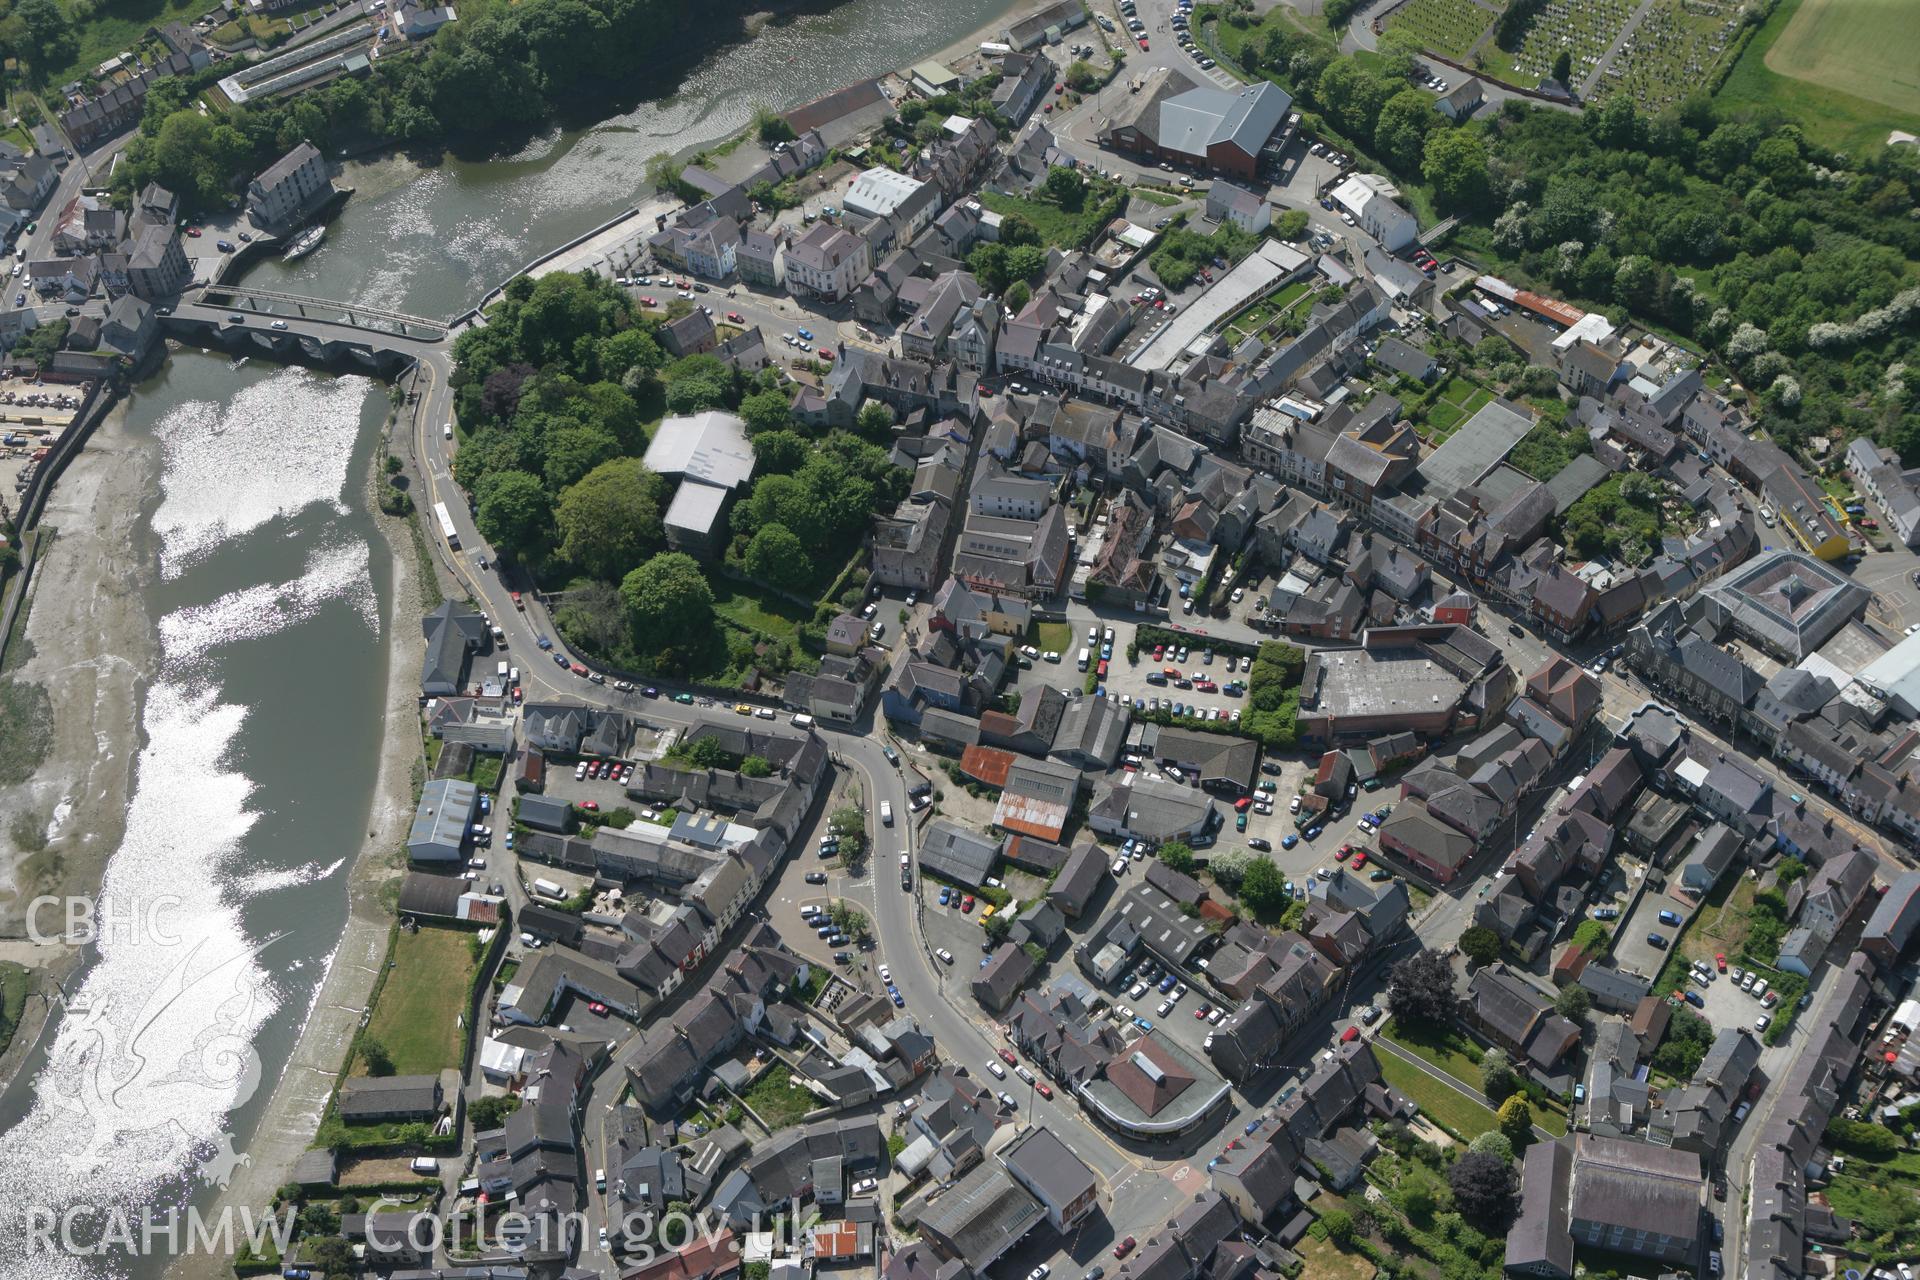 RCAHMW colour oblique photograph of Cardigan Castle and town. Taken by Toby Driver on 25/05/2010.